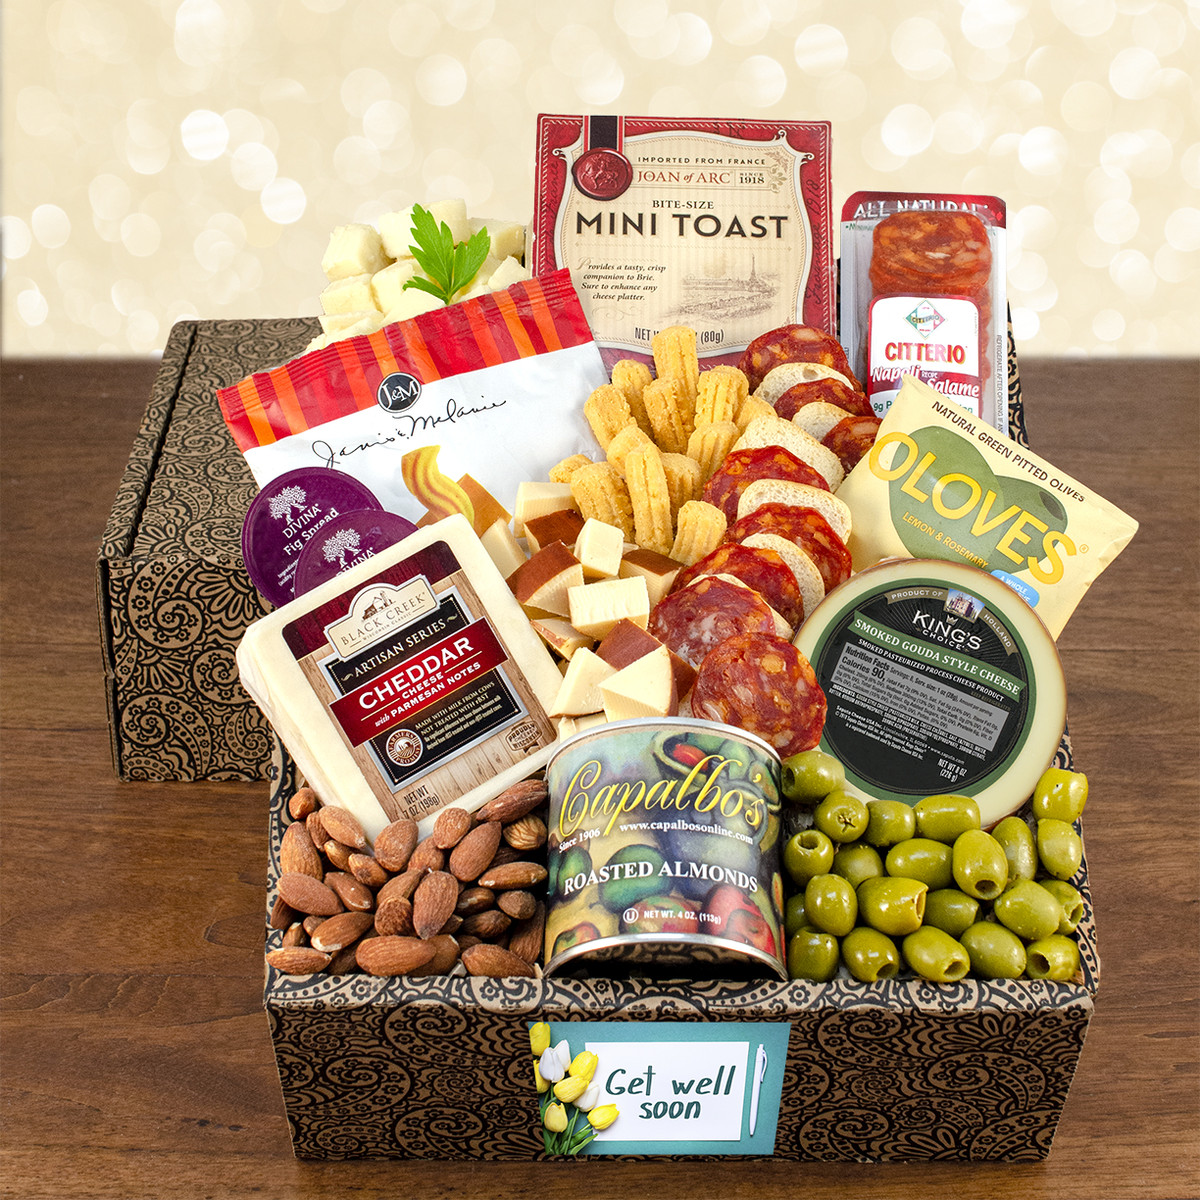 Capalbos Cheese and Crackers Classic Collection Gift Box - Get Well